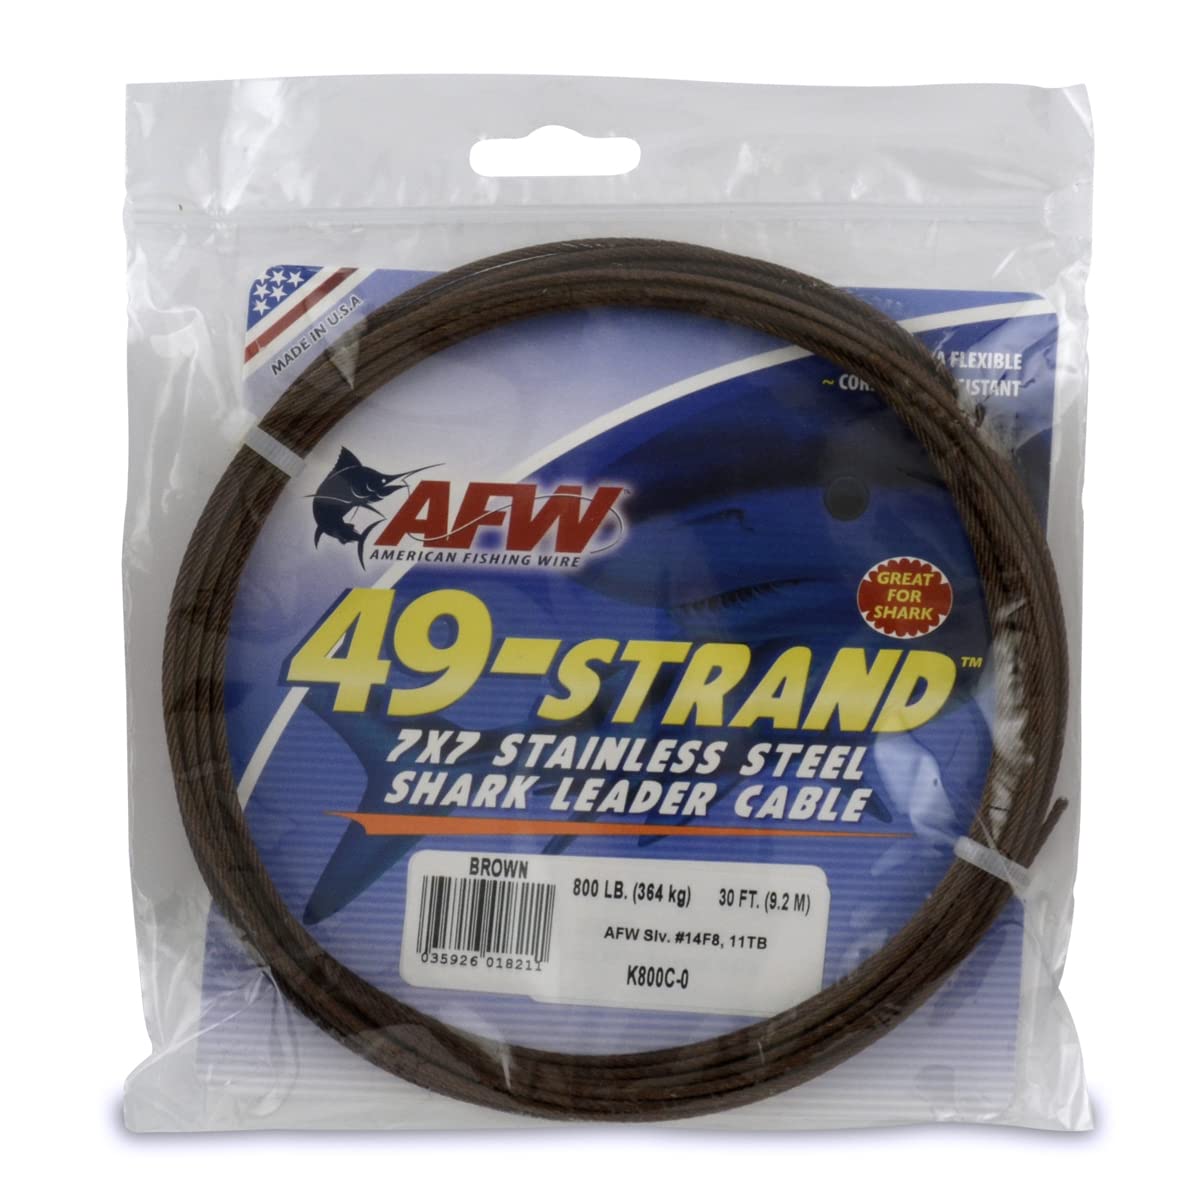 American Fishing Wire 49 Strand, 7x7 Stainless Steel Leader Cable - Strong Heavy  Duty Fishing Wire for Shark and Up to 900lb Test Camo 800 Lb Test, 2.06 Mm  Dia, 30 Ft